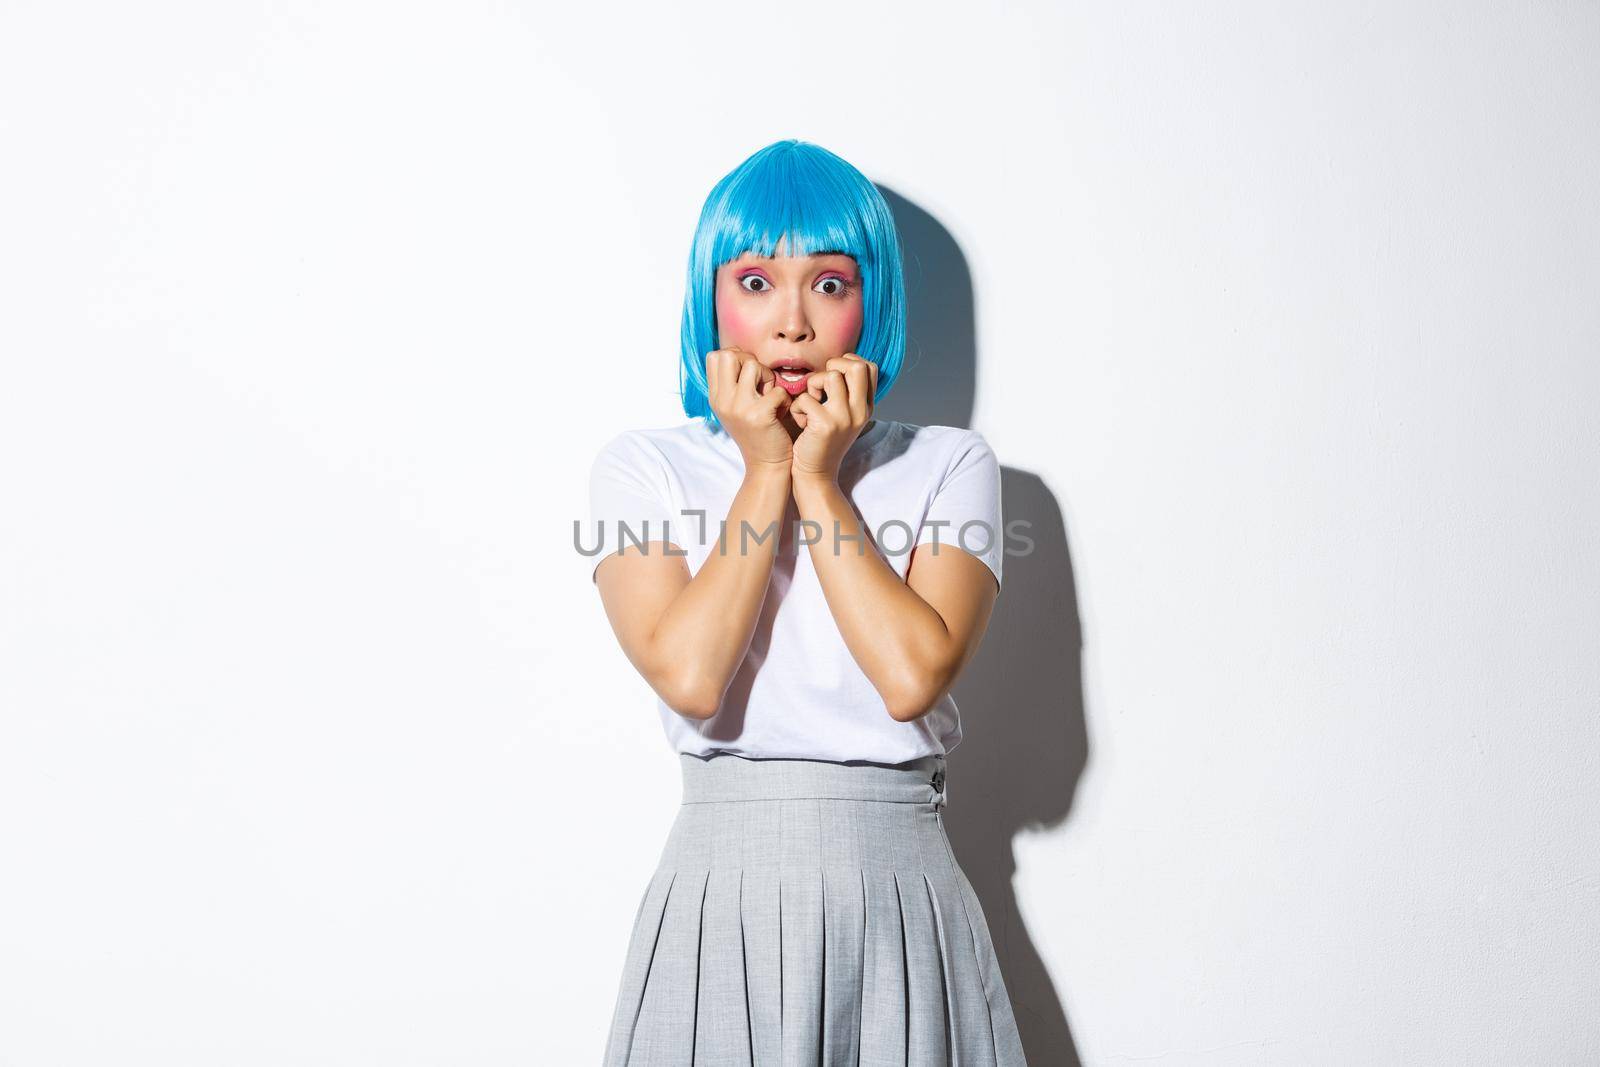 Portrait of scared asian woman gasping afraid, stare at camera ambushed, wearing blue party wig and schoolgirl uniform for halloween, standing over white background.